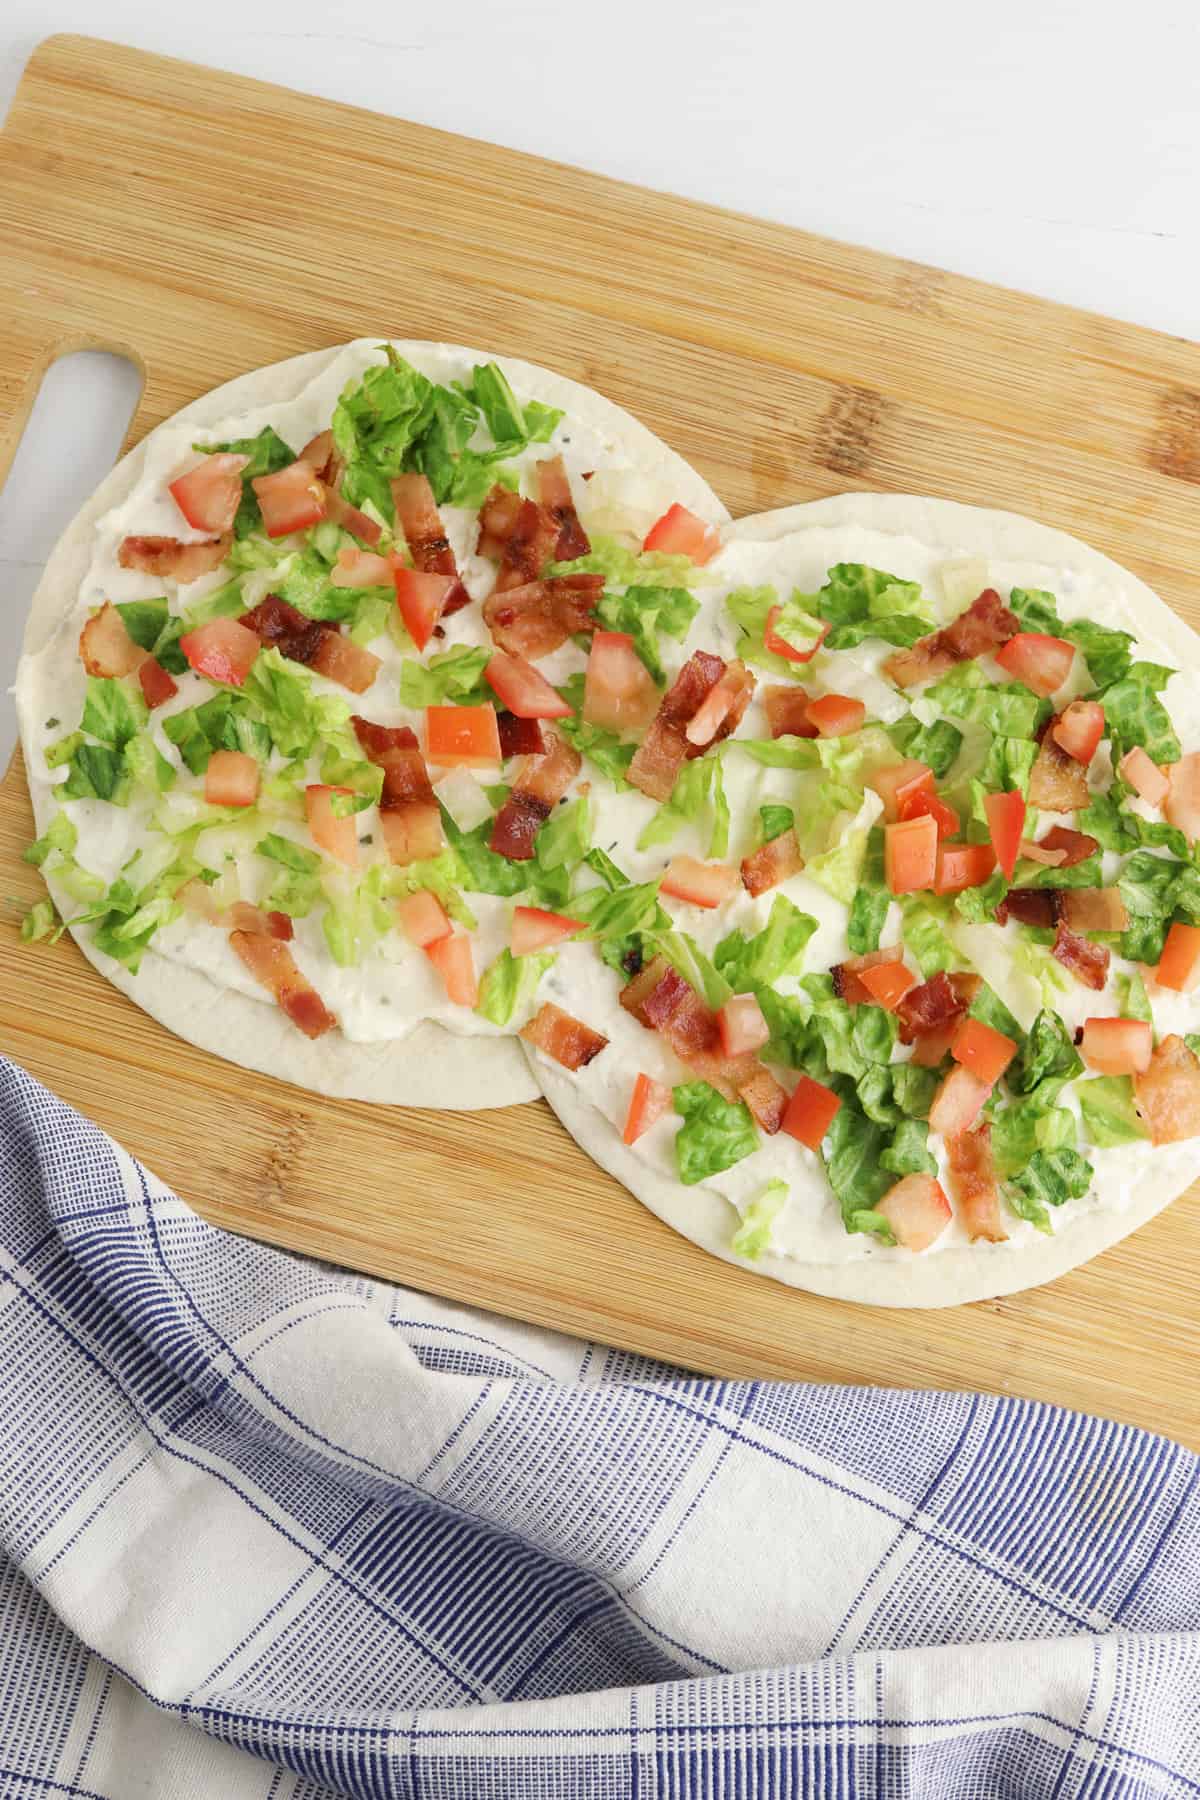 Two flour tortillas layed slightly overlapping on a cutting board. The tortillas are topped with creamy dressing, shredded lettuce, diced tomatoes, and chopped bacon.